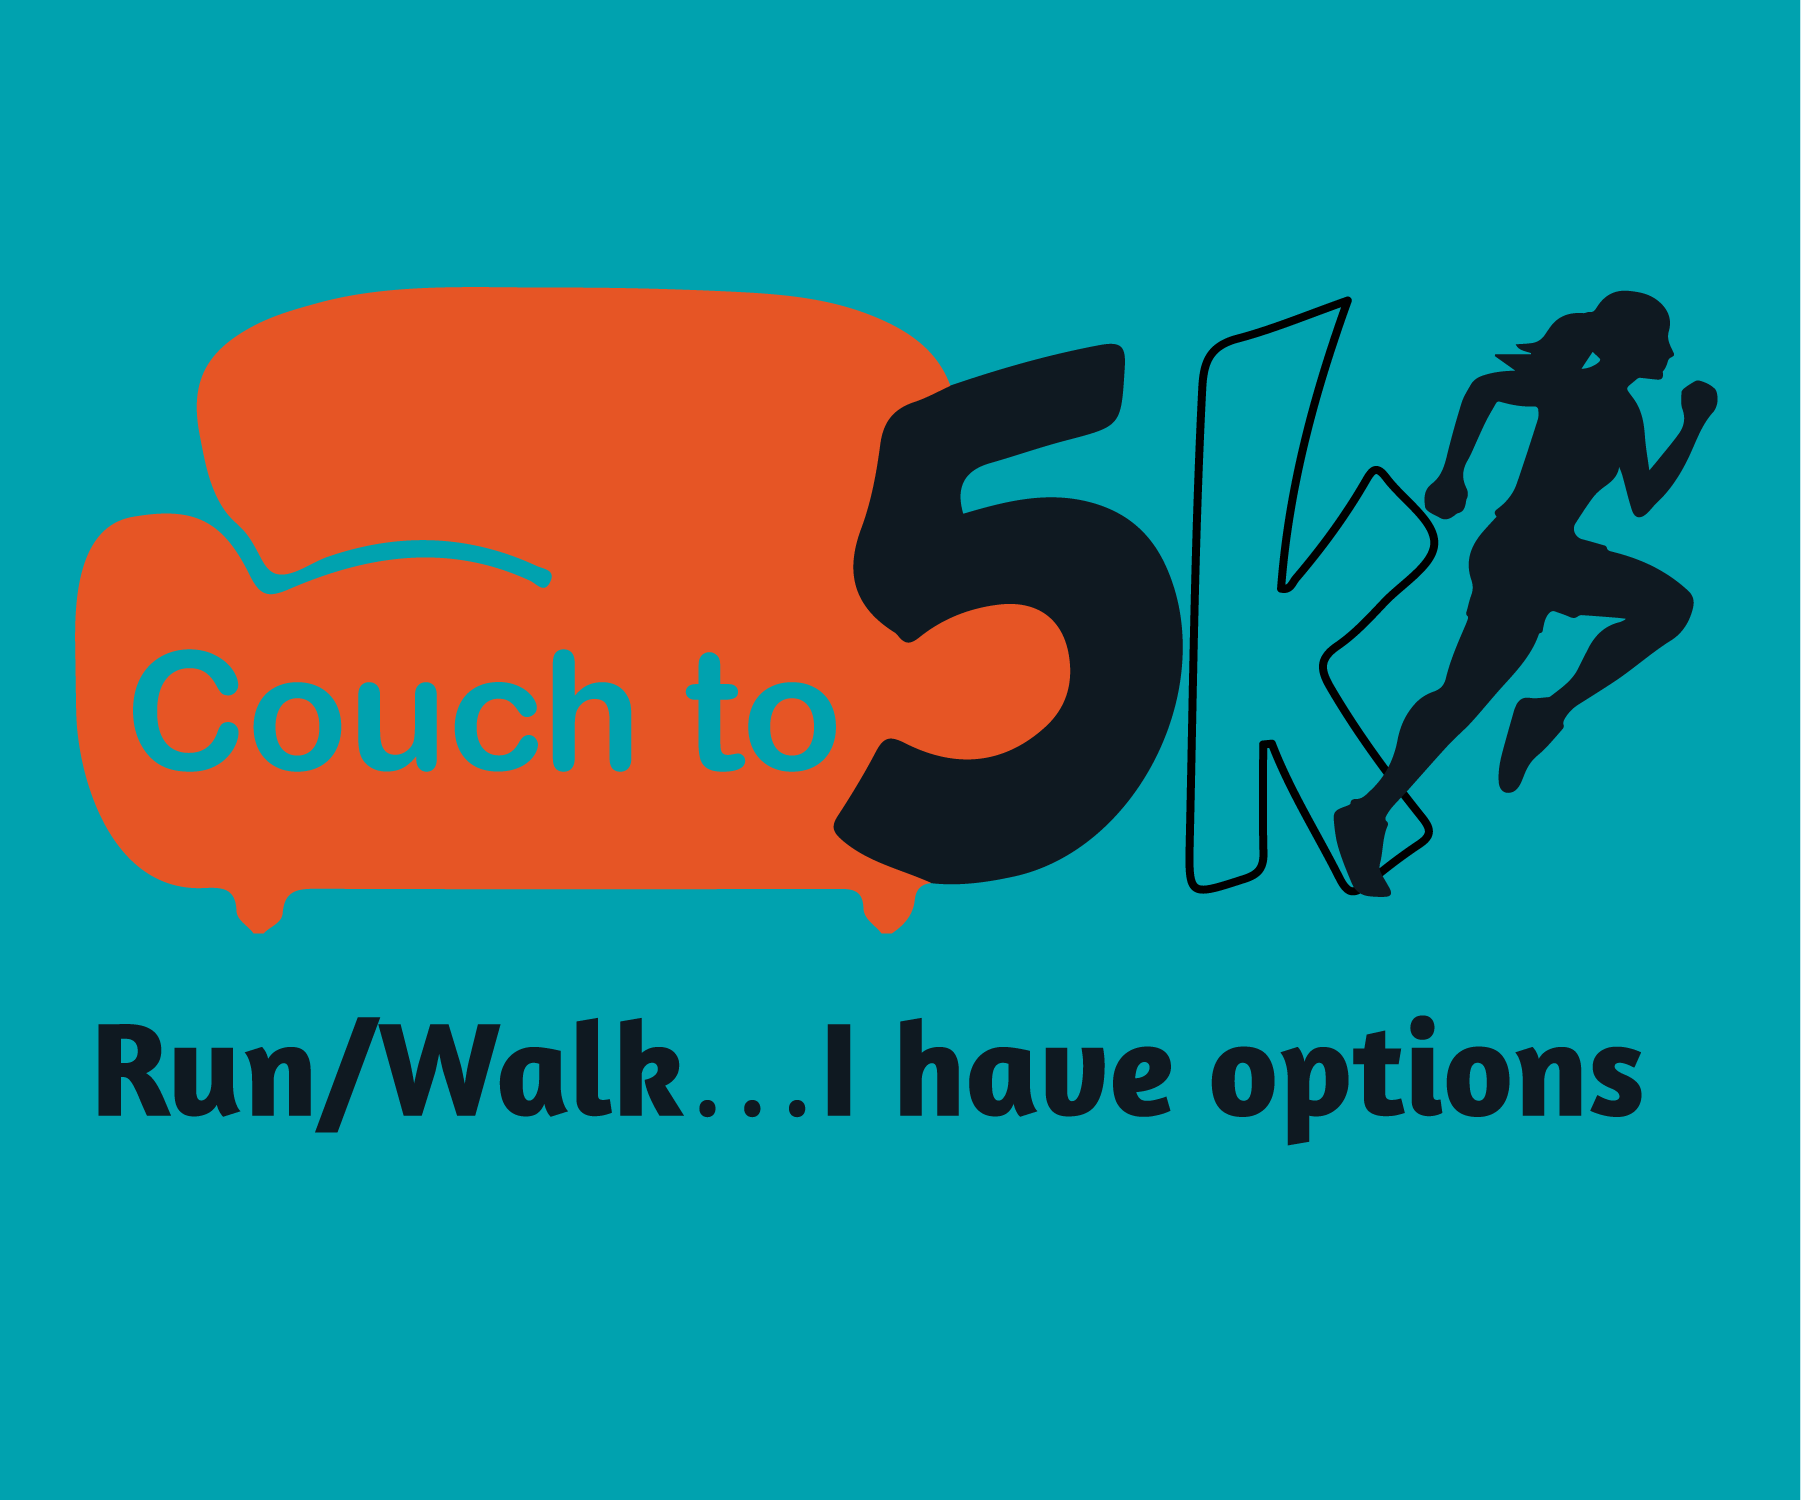 Couch to 5k Logo